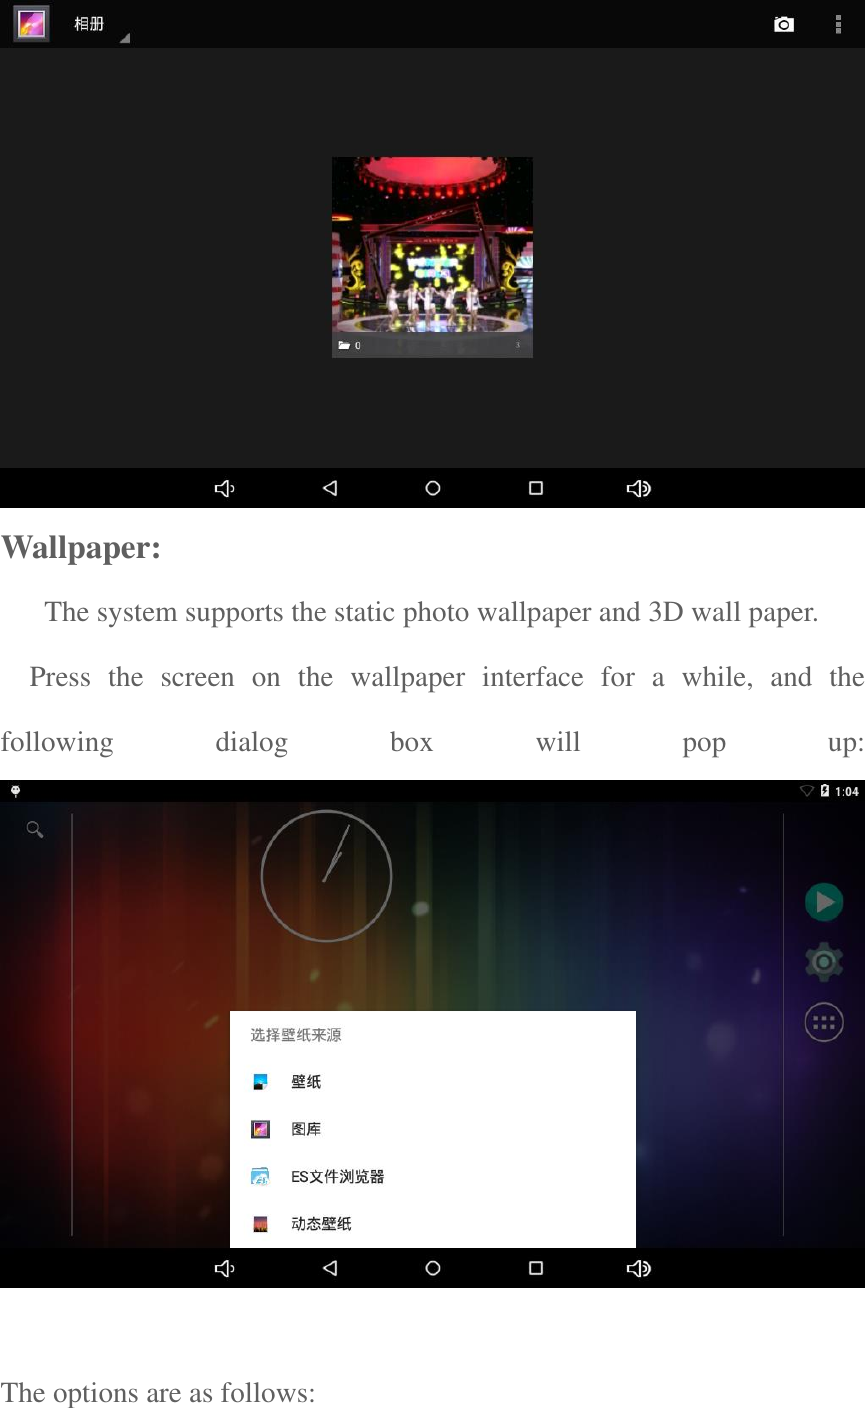   Wallpaper:    The system supports the static photo wallpaper and 3D wall paper.     Press  the  screen  on  the  wallpaper  interface  for  a  while,  and  the following  dialog  box  will  pop  up:                     The options are as follows:   